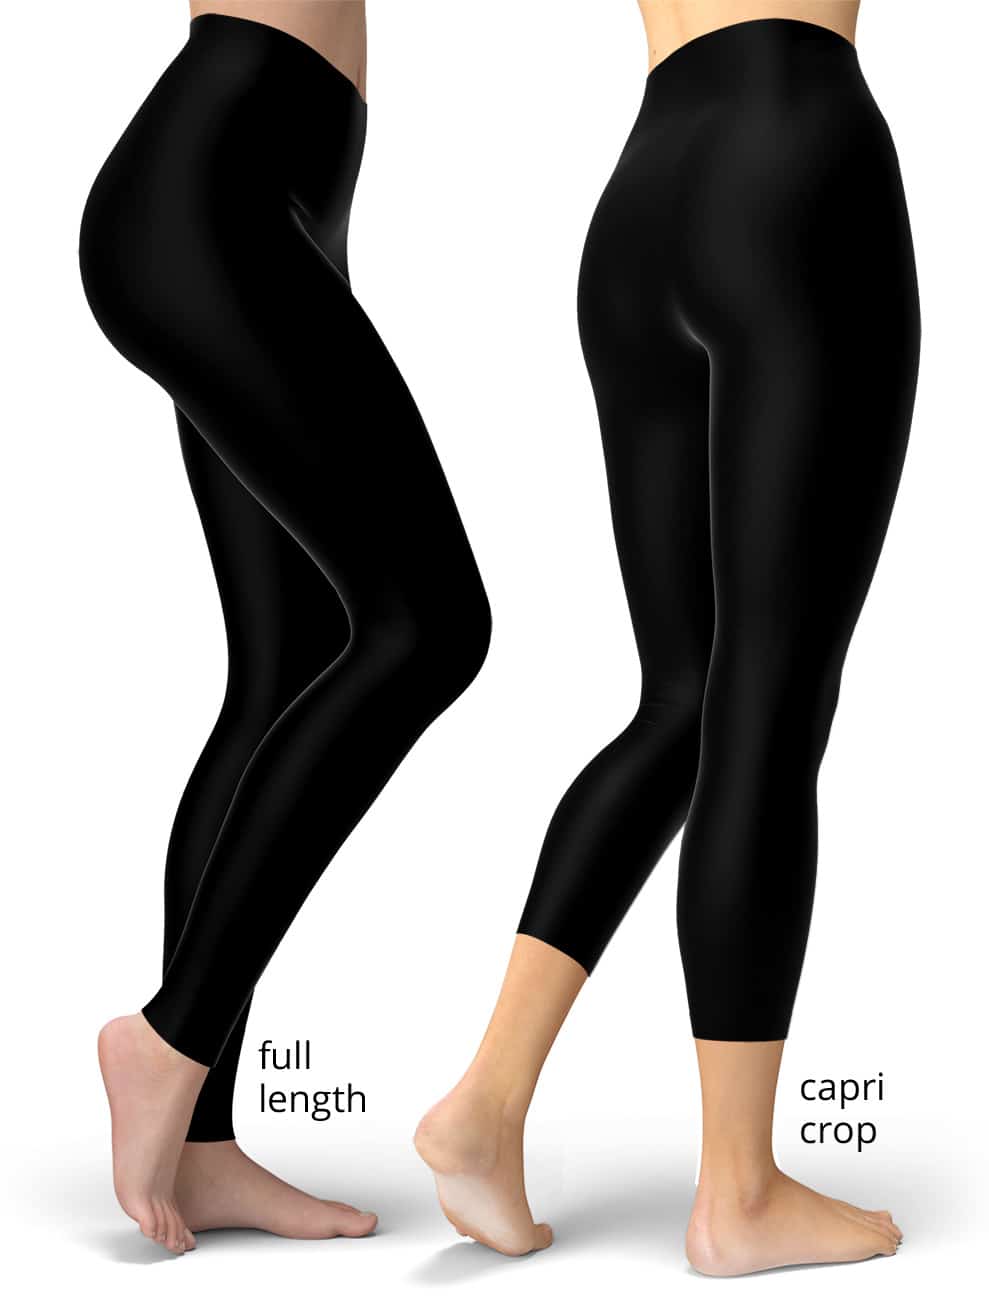 Squeaky Chimp - Free Bengals Leggings / Size Extra large LIKE AND SHARE TO  WIN. Check out our leggings!